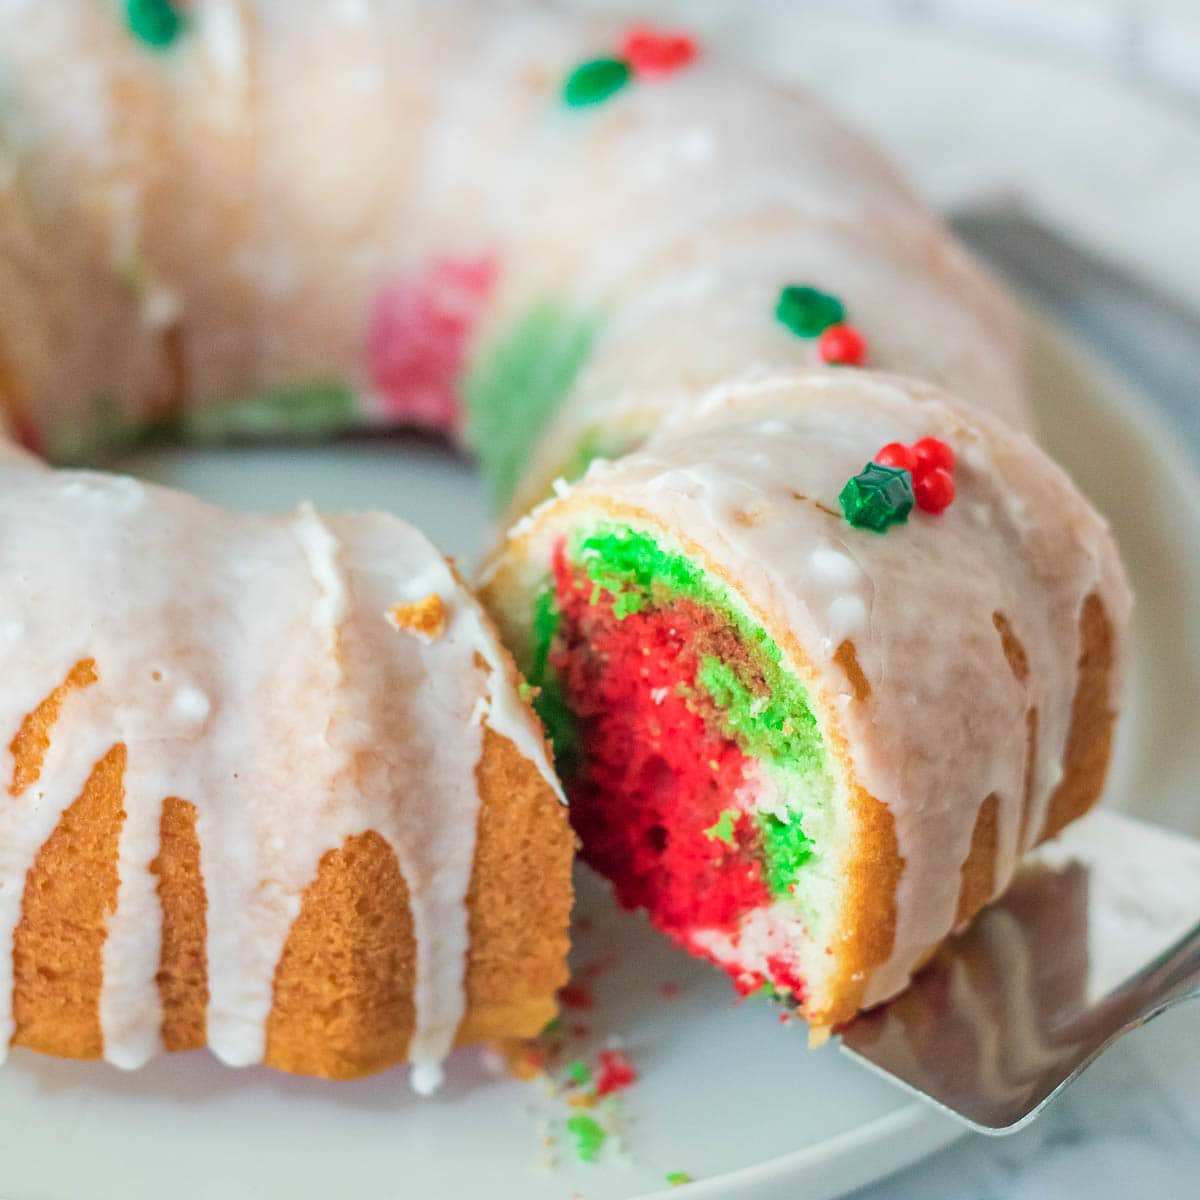 A festive Christmas bundt cake on a plate with a generous drizzle of icing.